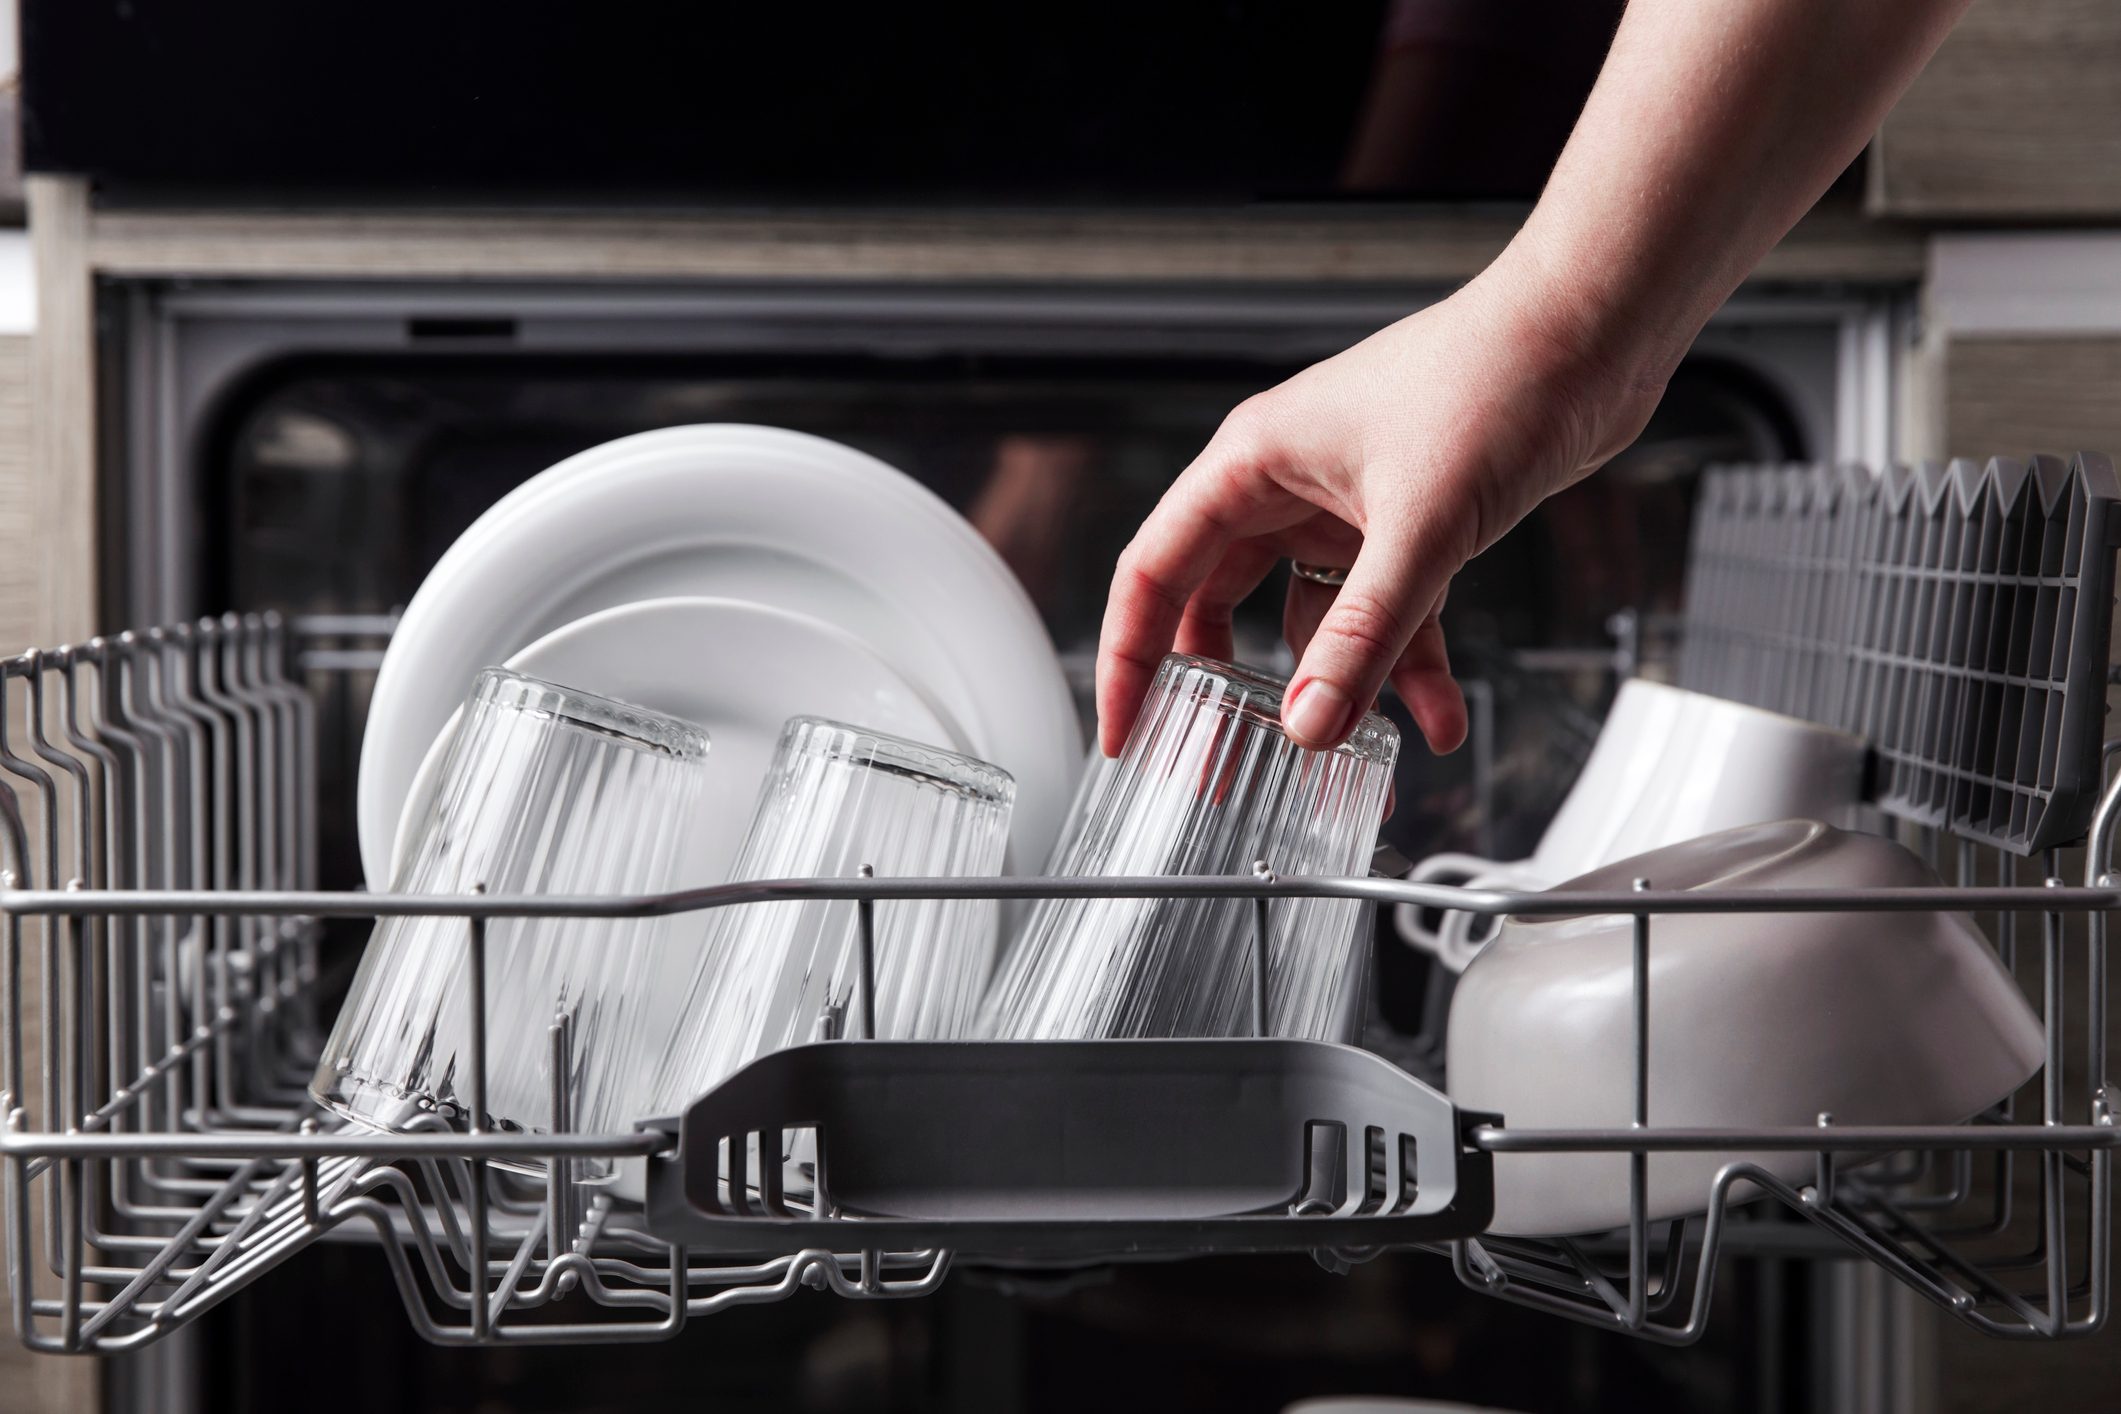 The Most Sanitary Ways to Dry Dishes